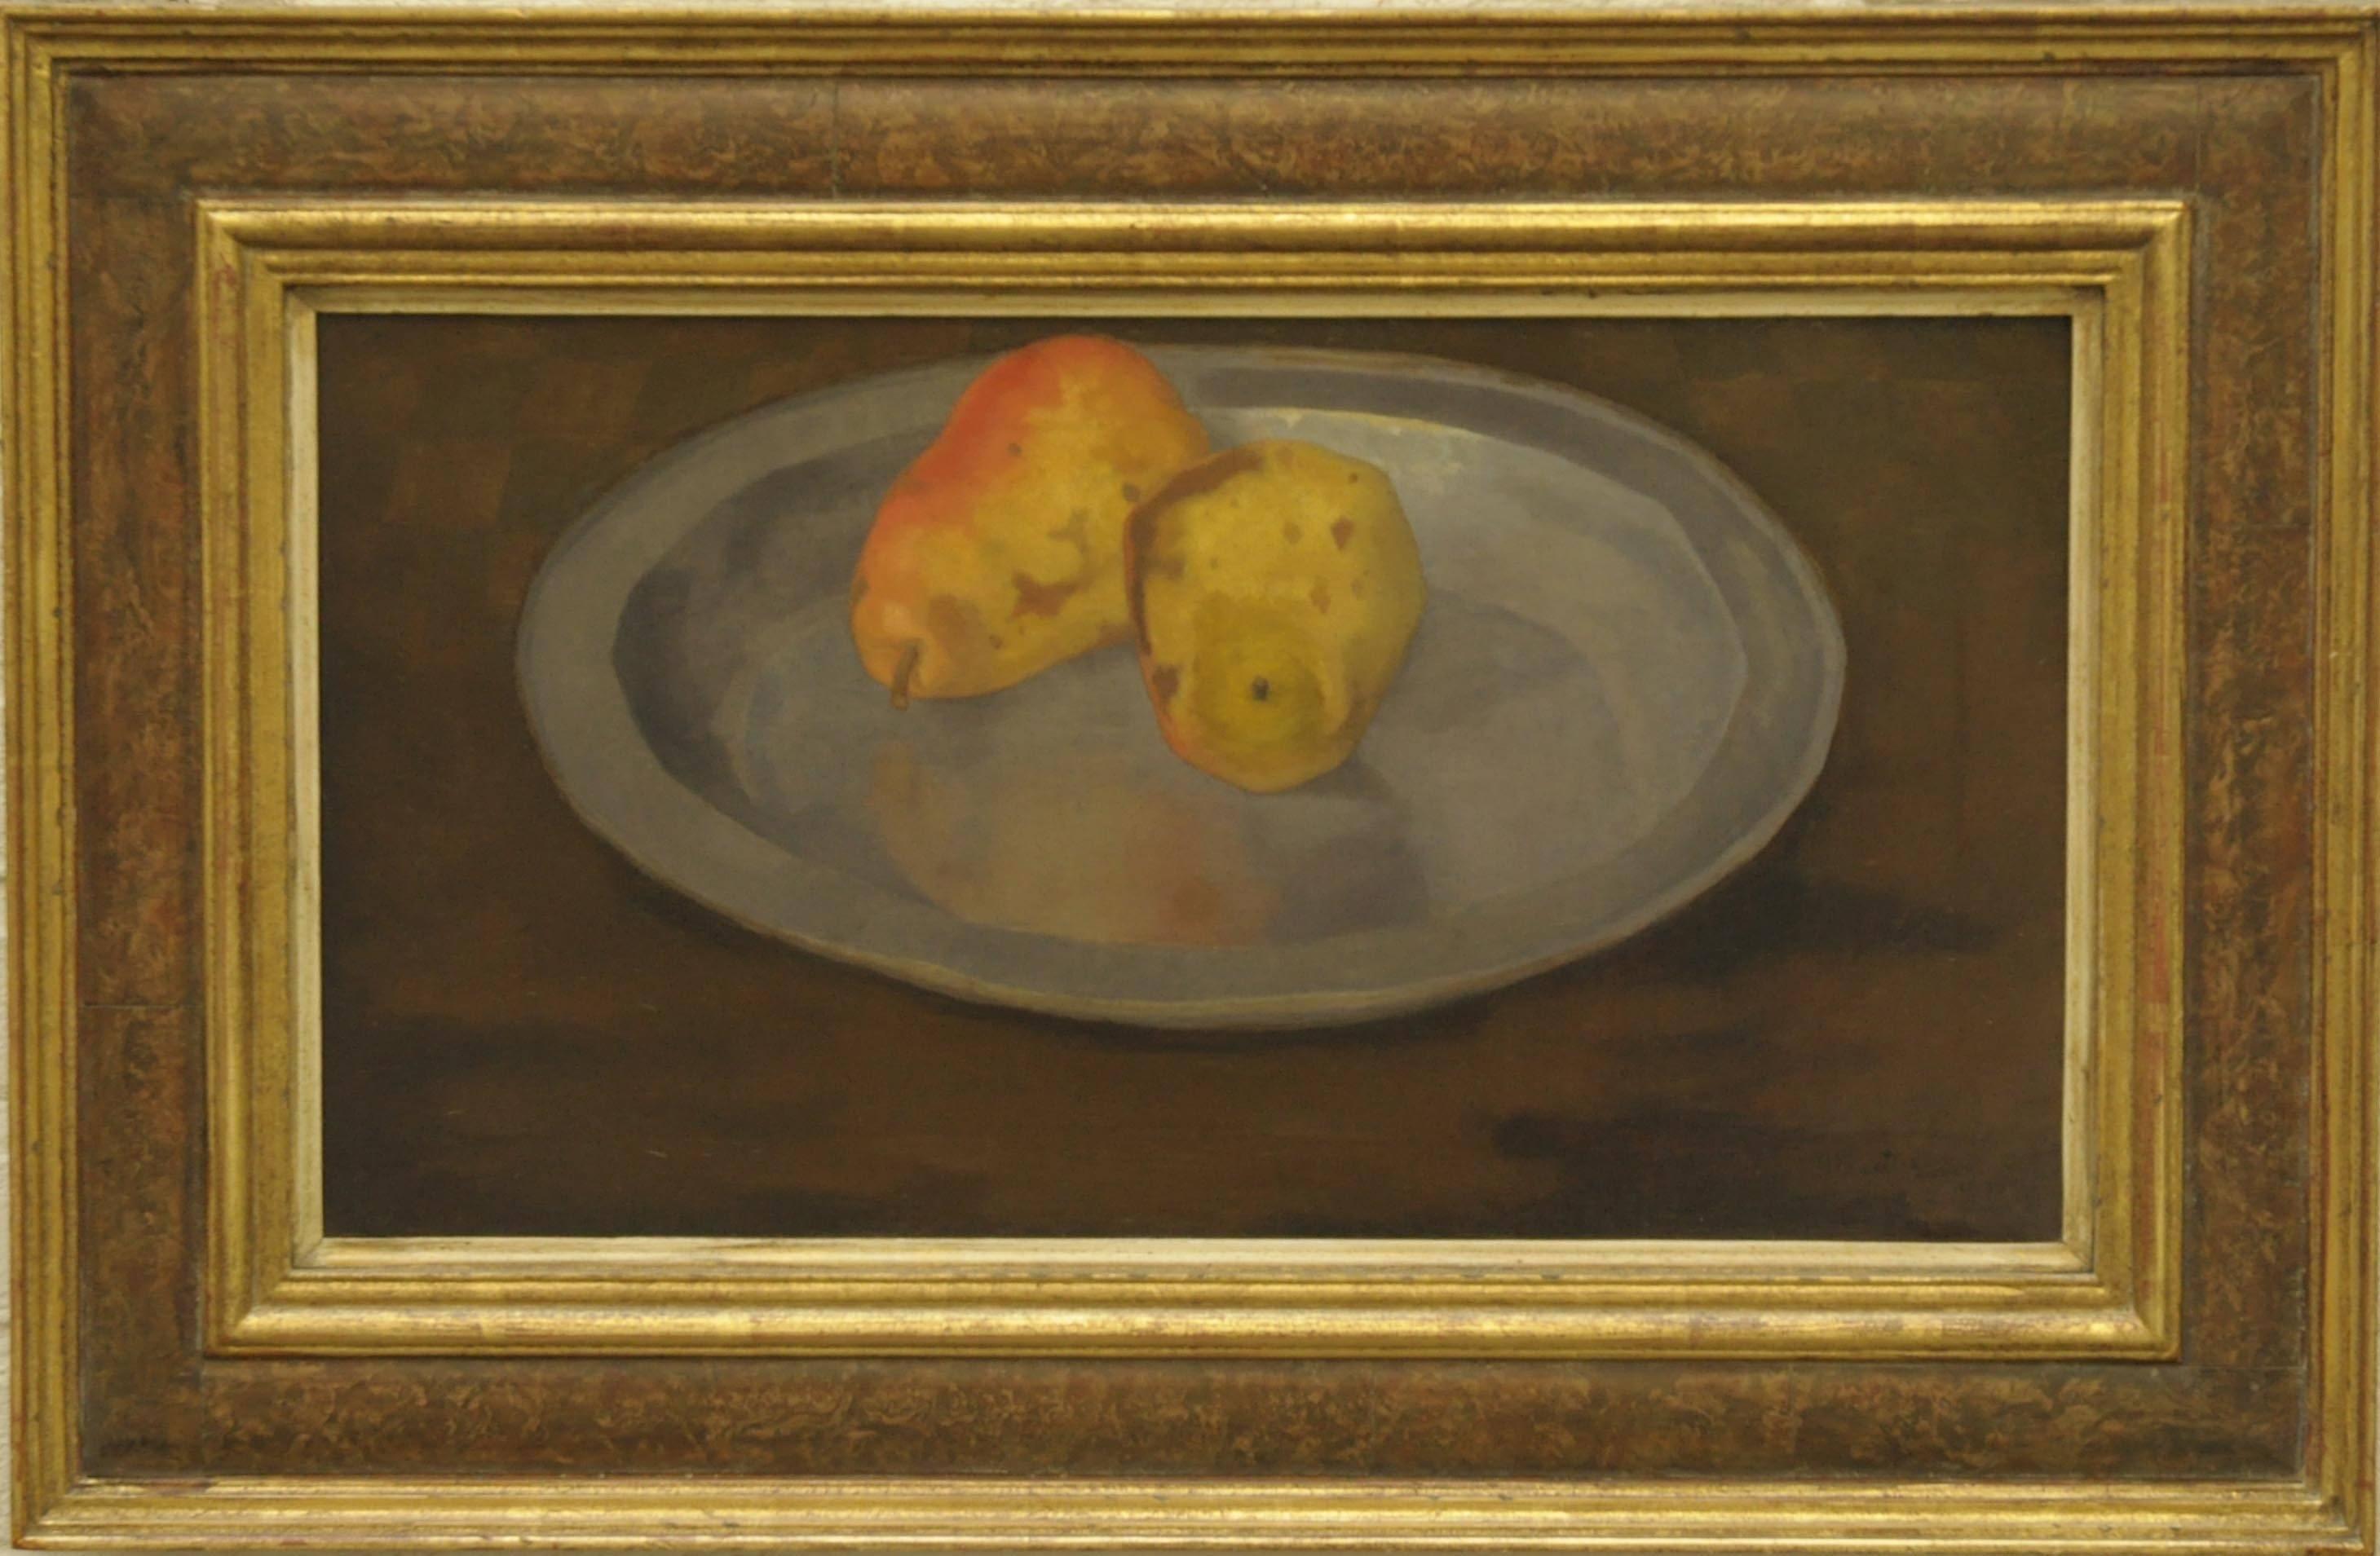 Two pears on a tin plate - Painting by Hendricus Jacobus Kuipers